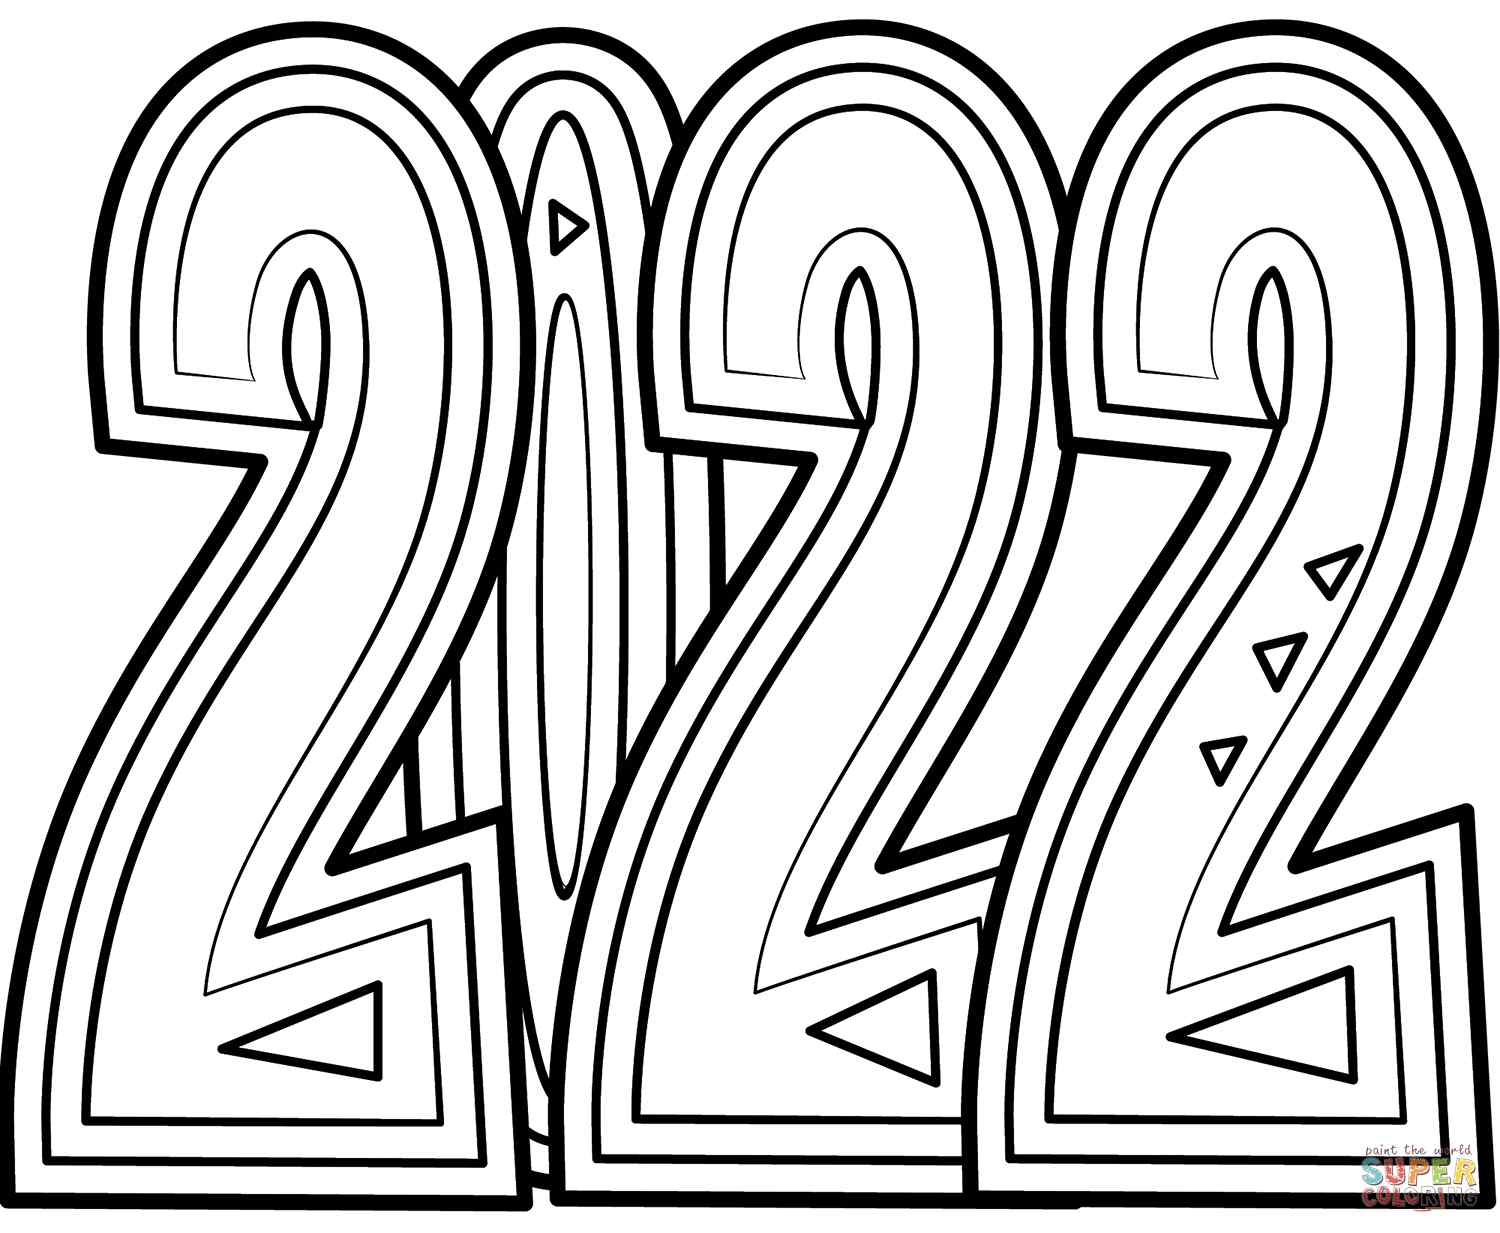 Happy New Year 2022 To Print For Kid Coloring Page